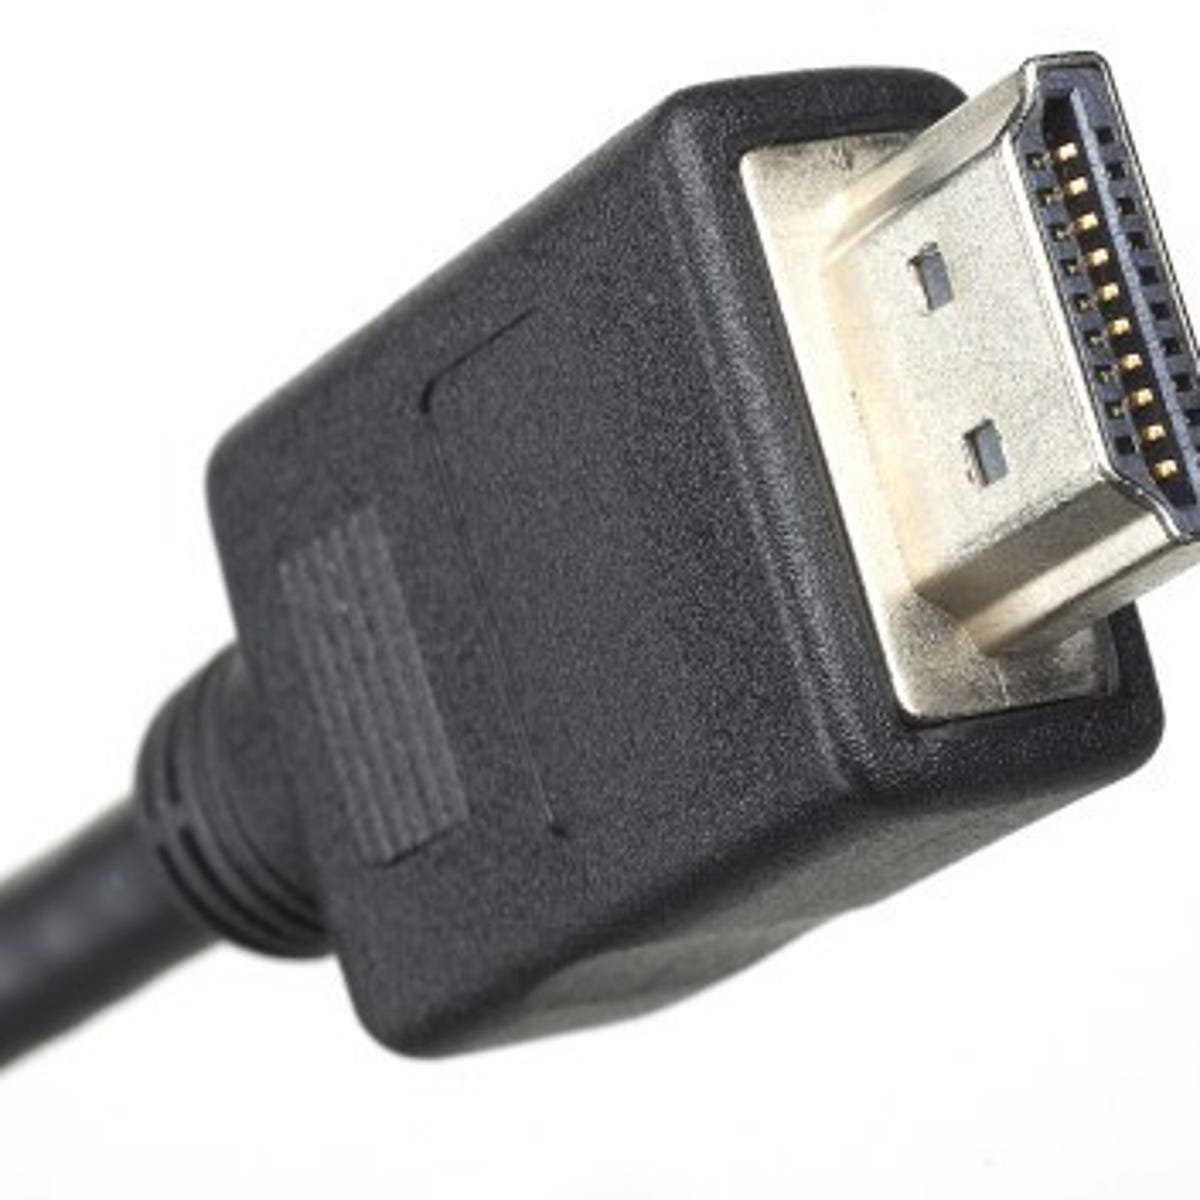 all HDMI cables are same - CNET